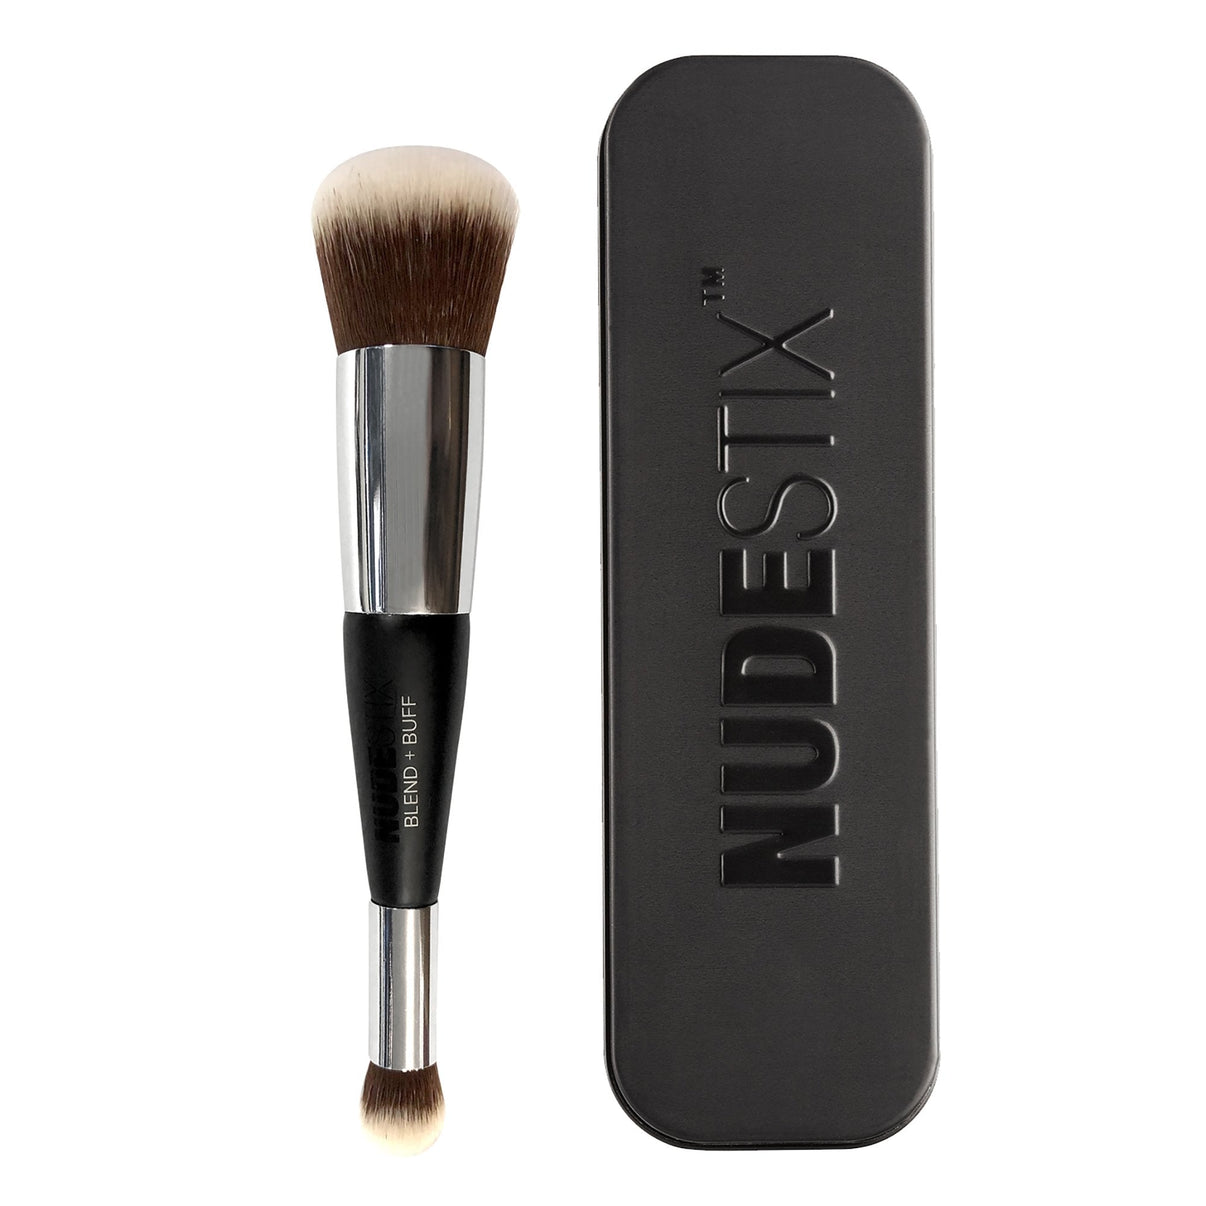  Blend & Buff Foundation Brush with Nudestix Can